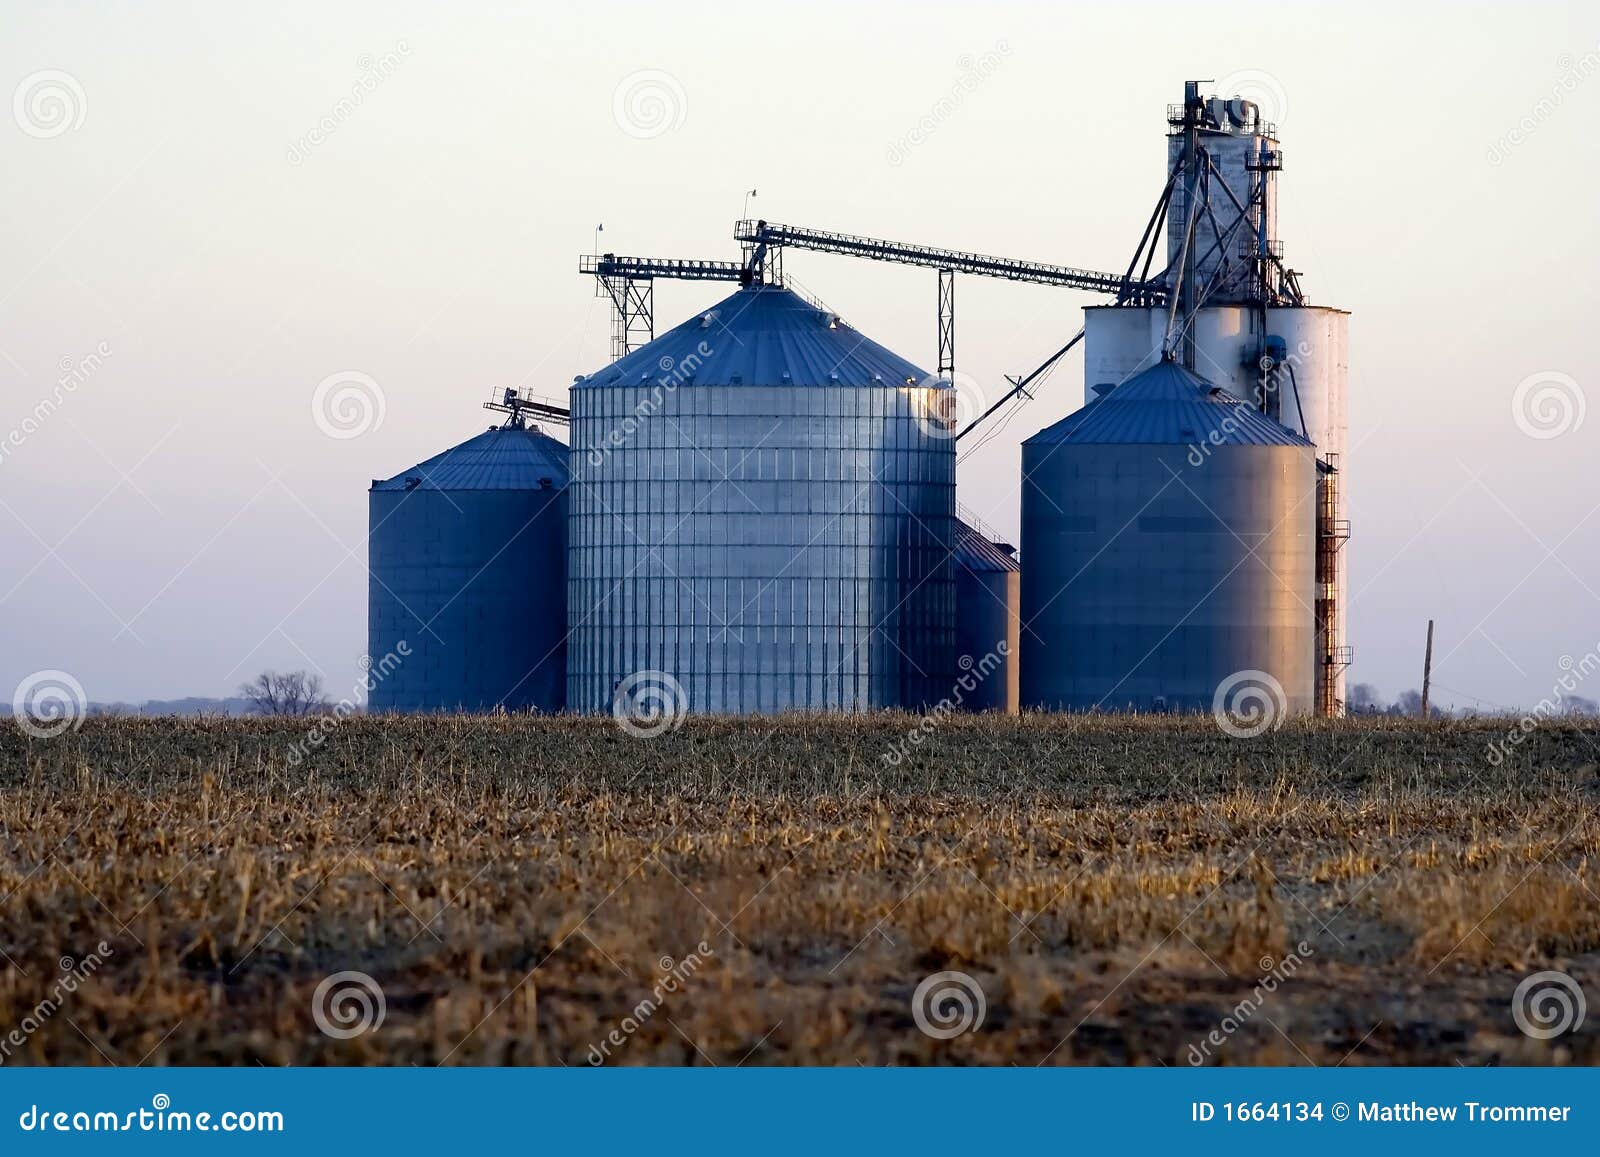 grain elevator in the midwest united states